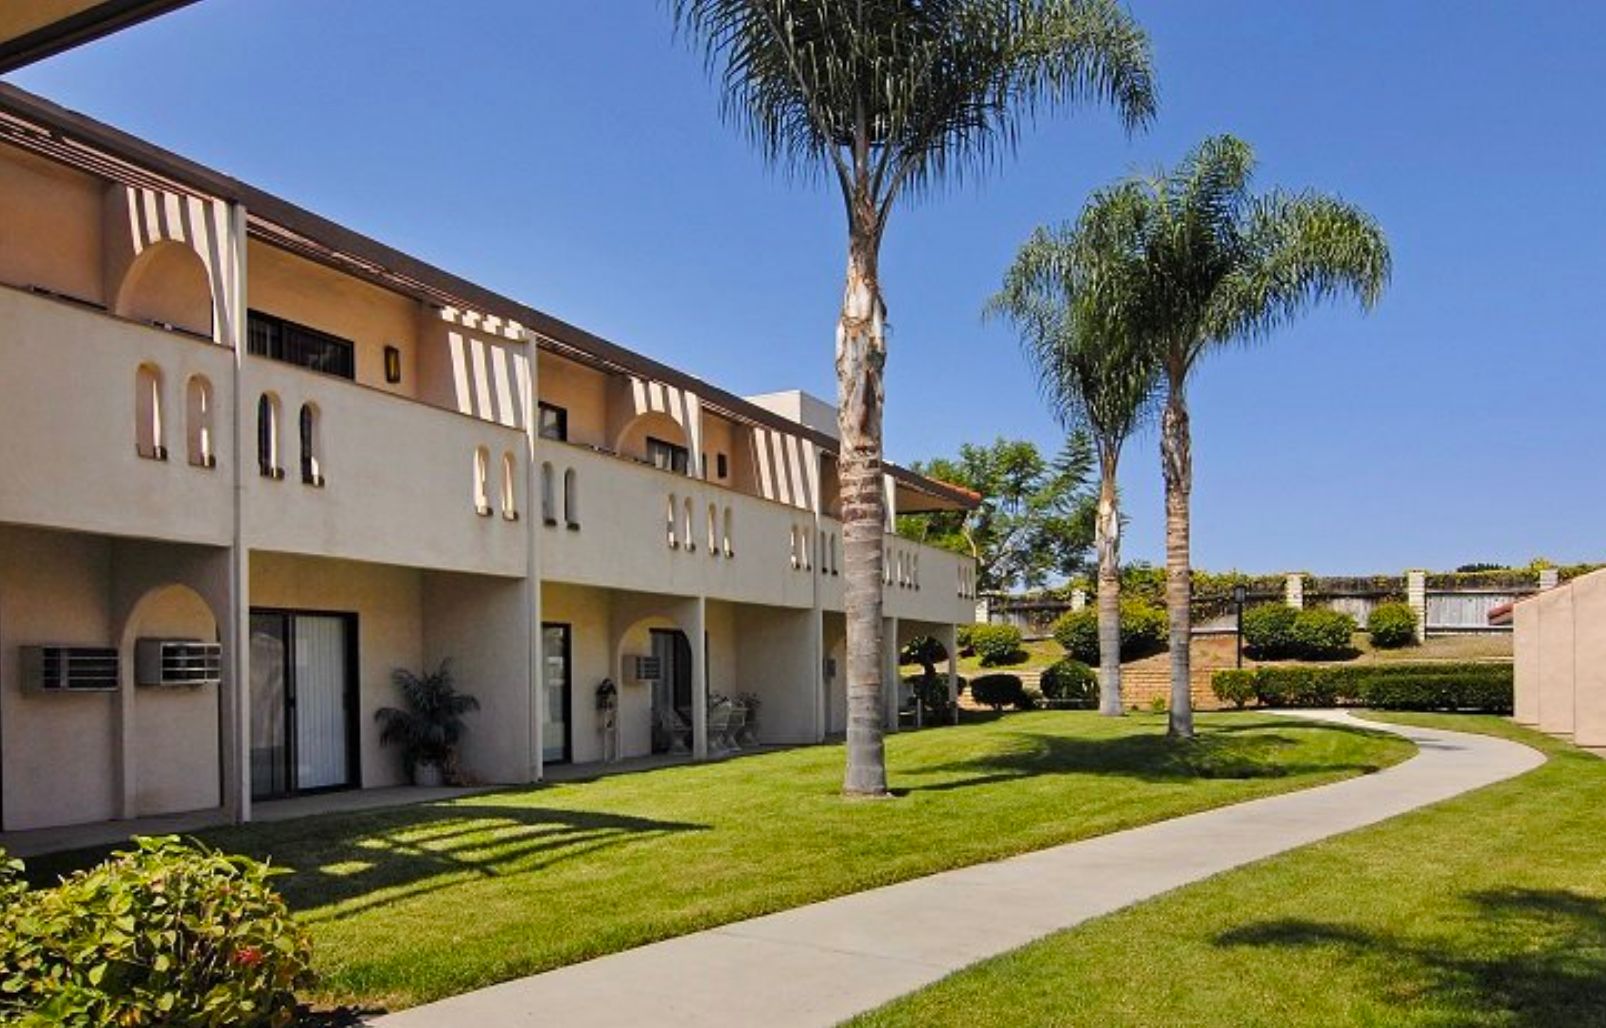 Architectural view of Pacifica Senior Living Vista, a suburban villa with lush lawns and urban trees.